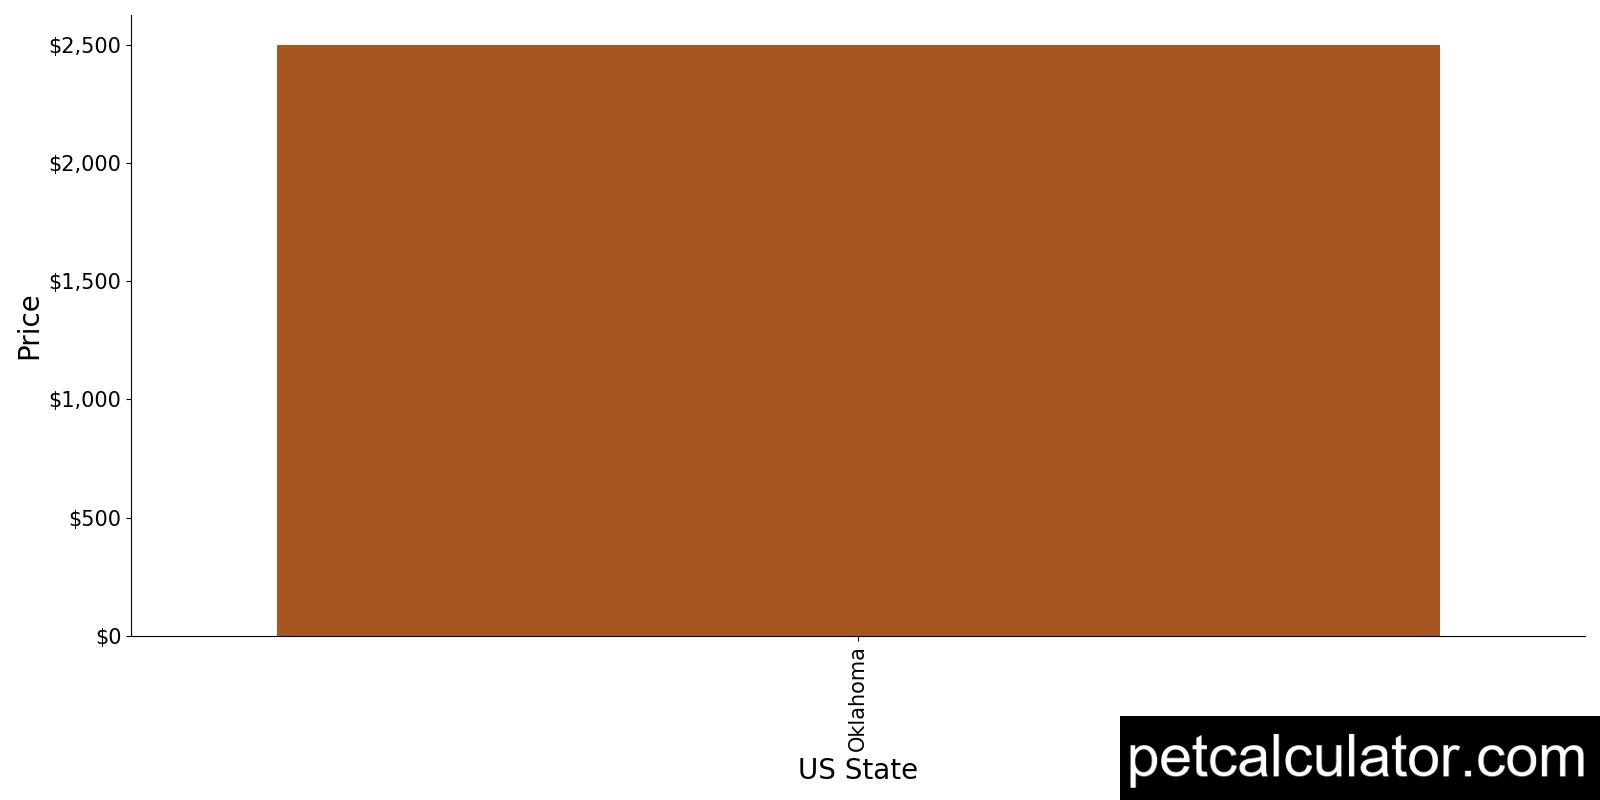 Price of Nova Scotia Duck Tolling Retriever by US State 